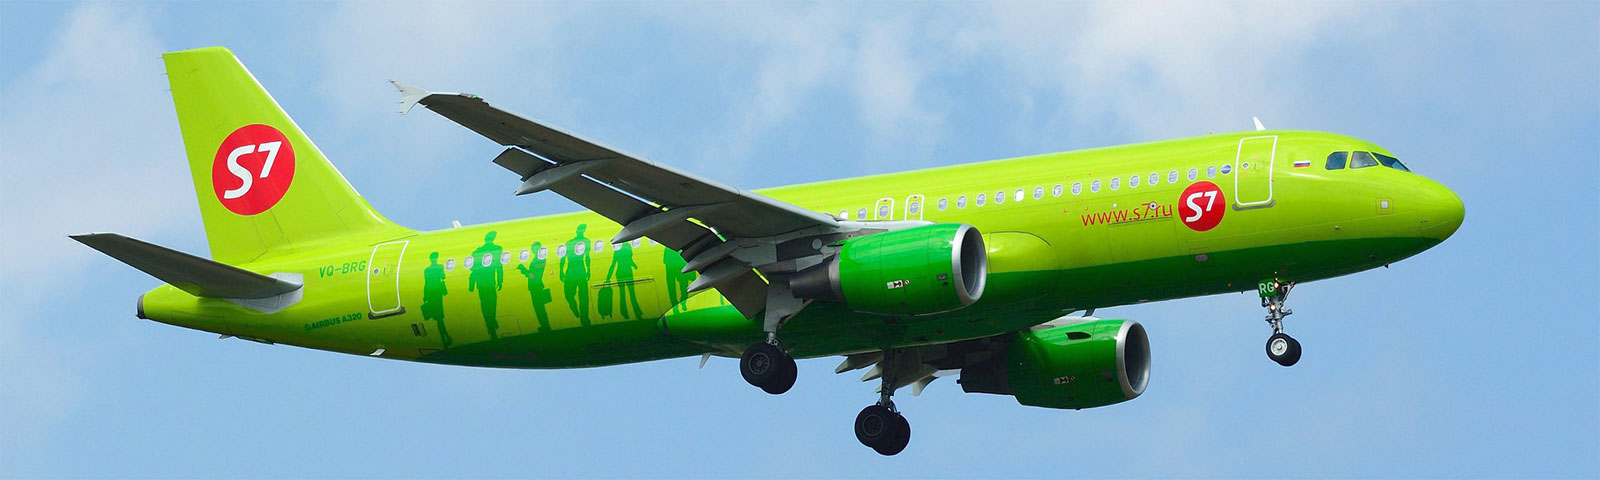 aereoplano S7 airlines in decollo